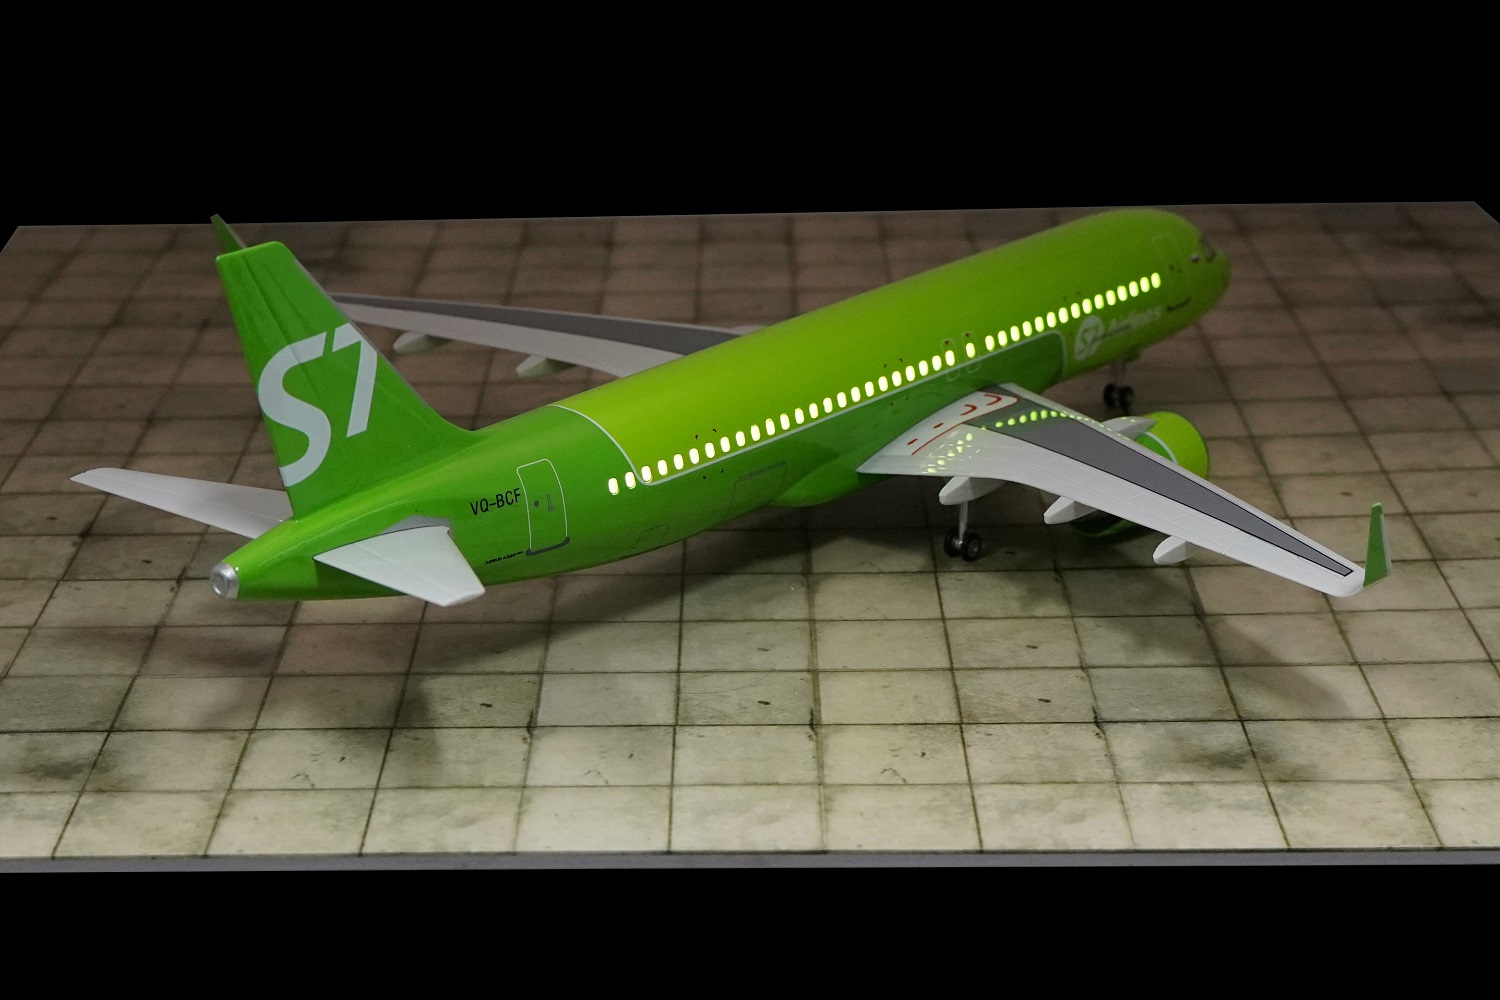   Airbus A320 Neo,  S7 Airlines .    .  # 3 hobbyplus.ru